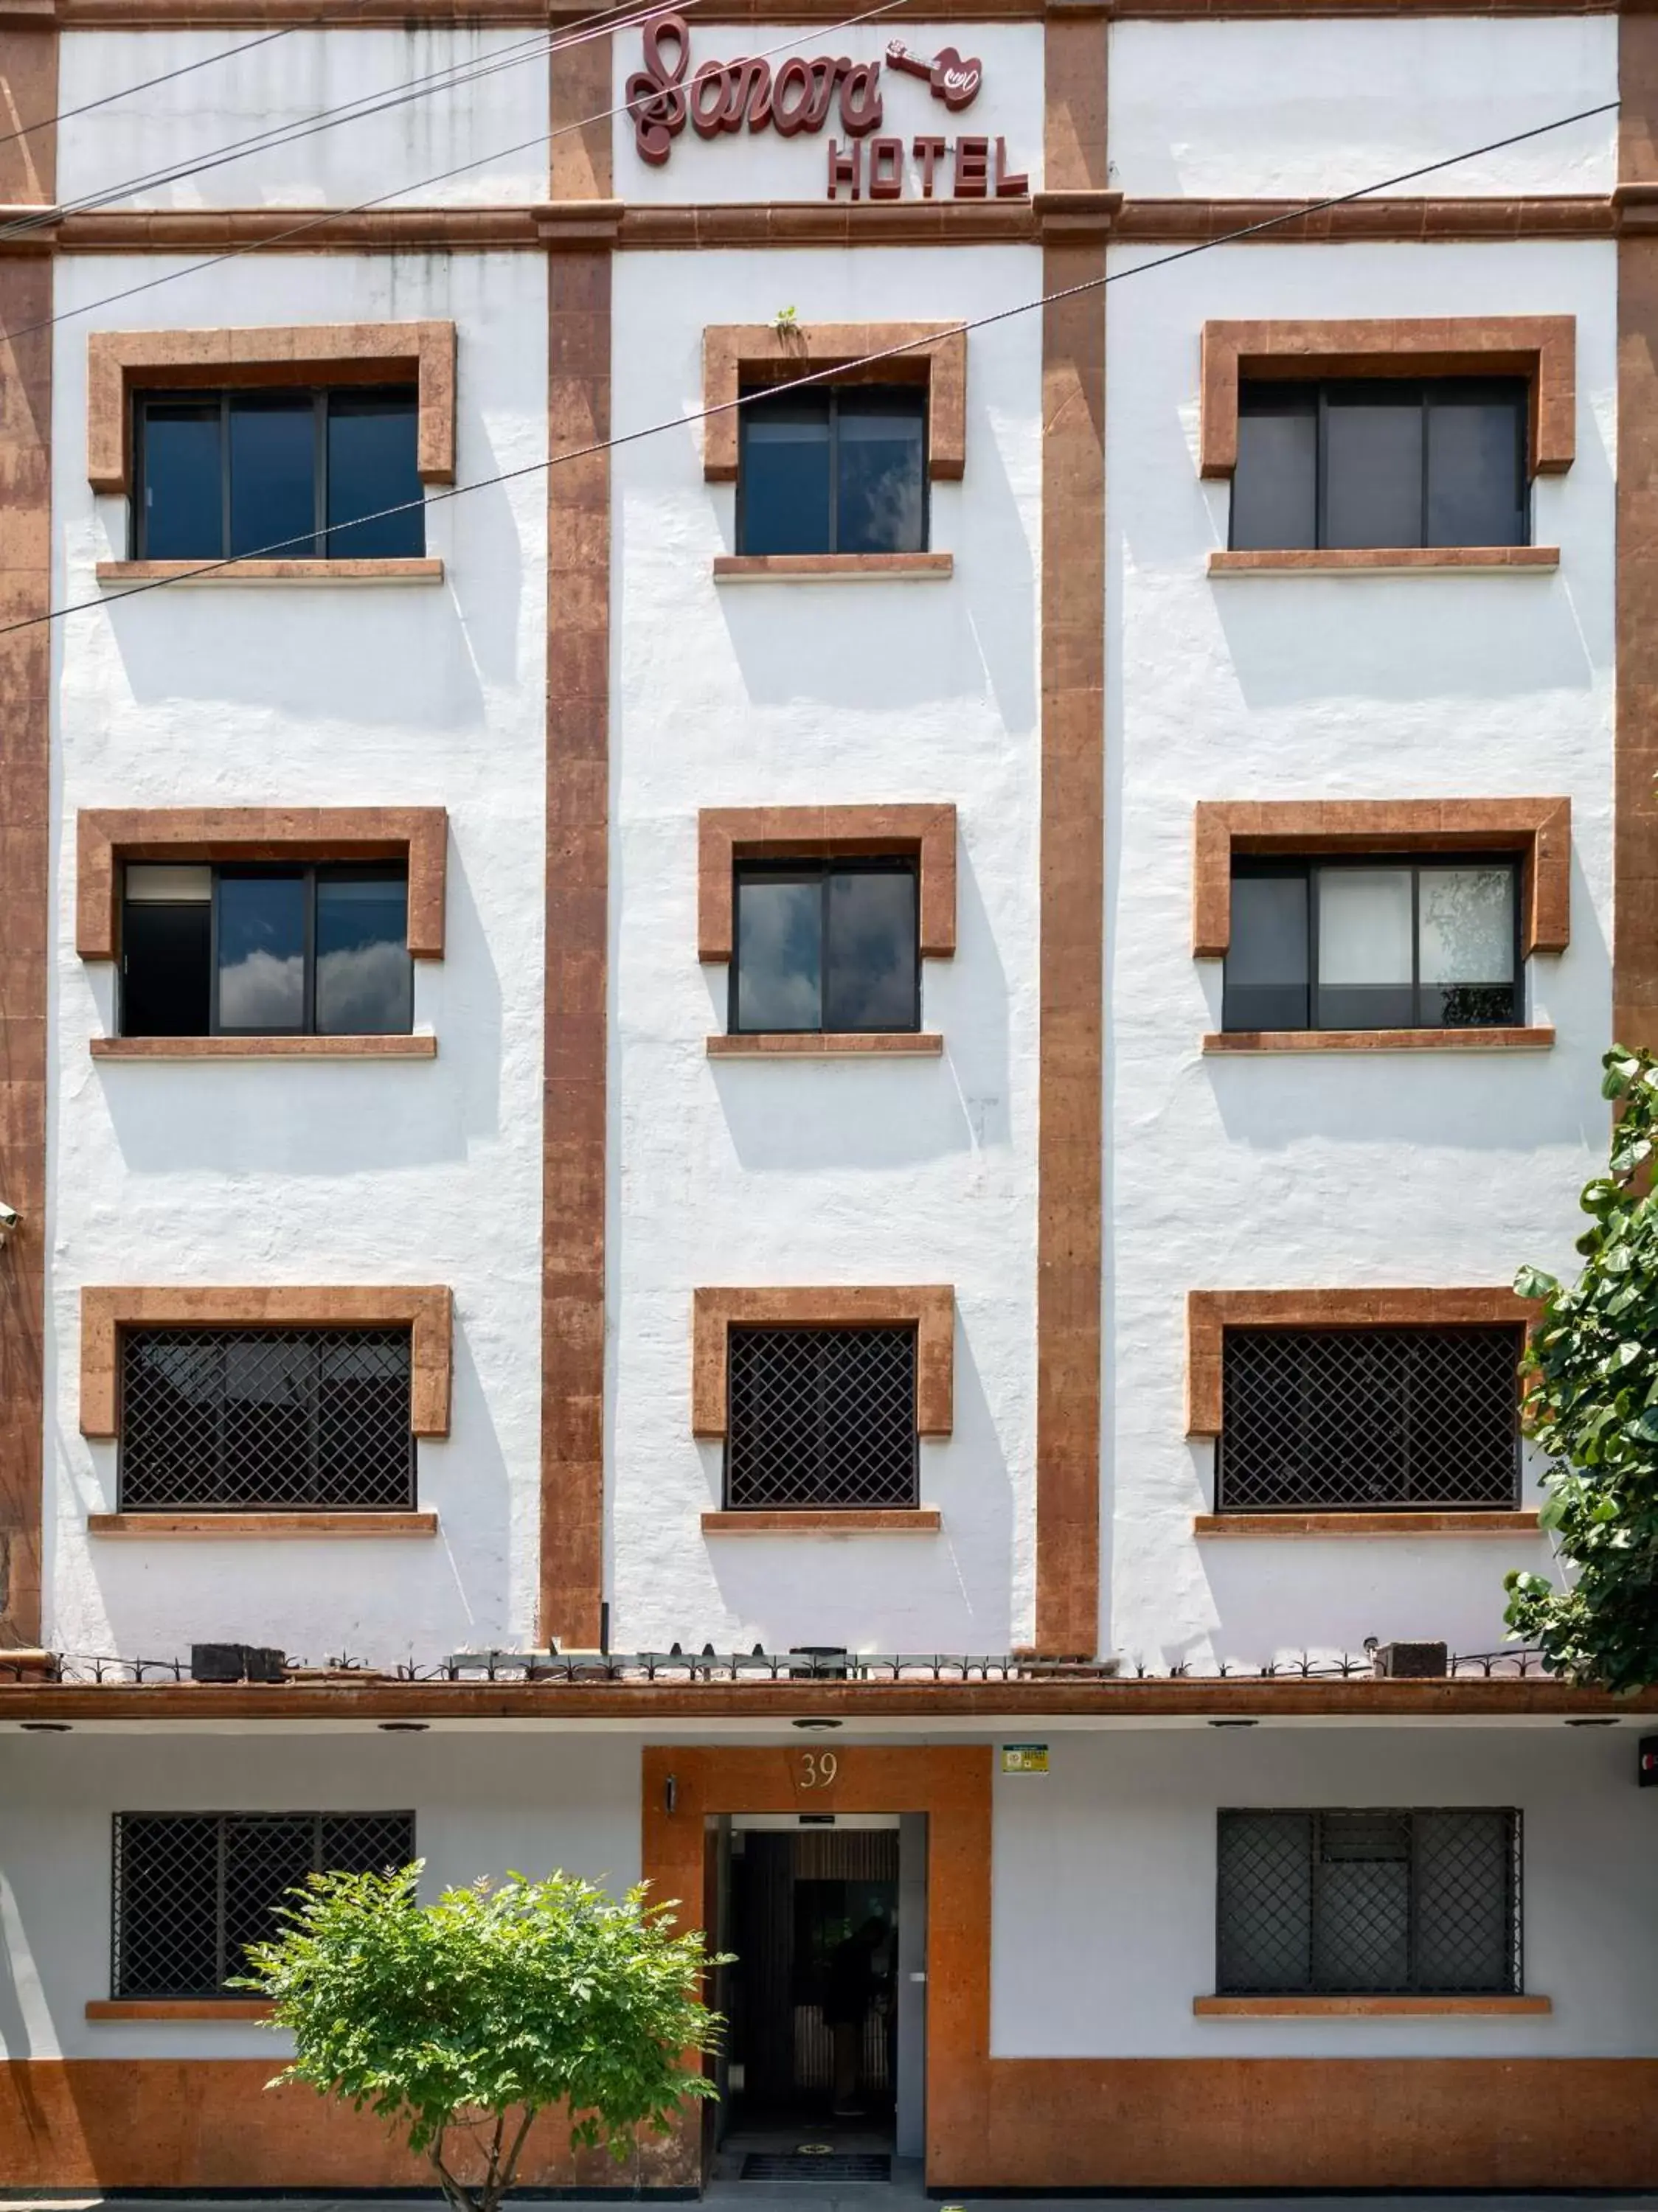 Property Building in Hotel Sonora